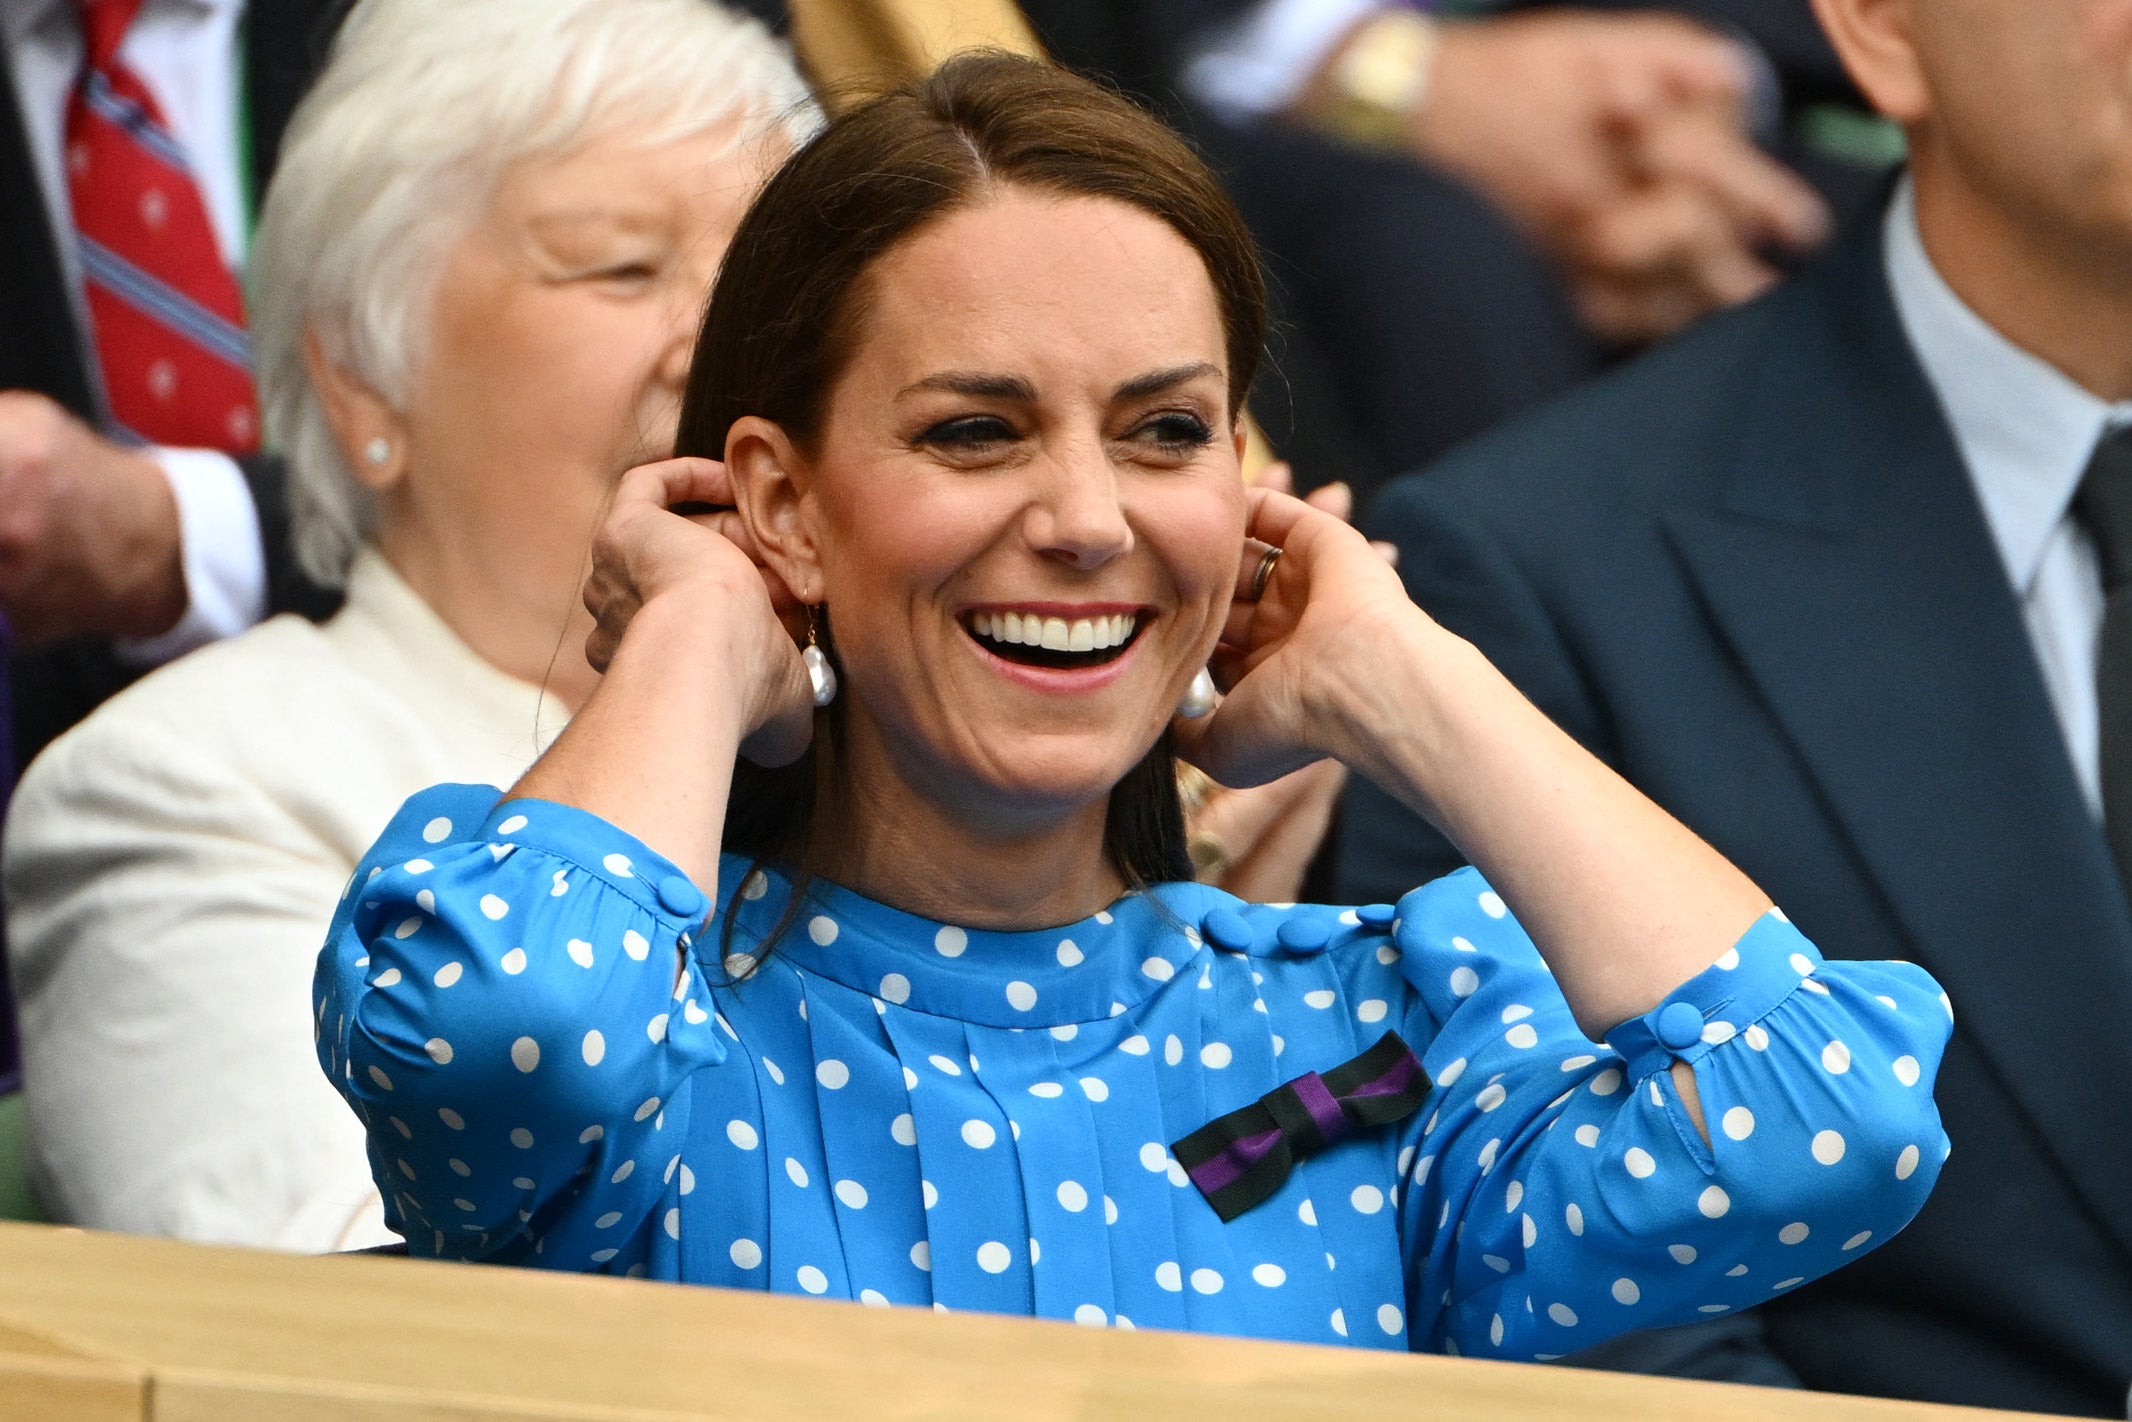 Kate Middleton was previously captured on camera blowing a kiss to her parents at Wimbledon.